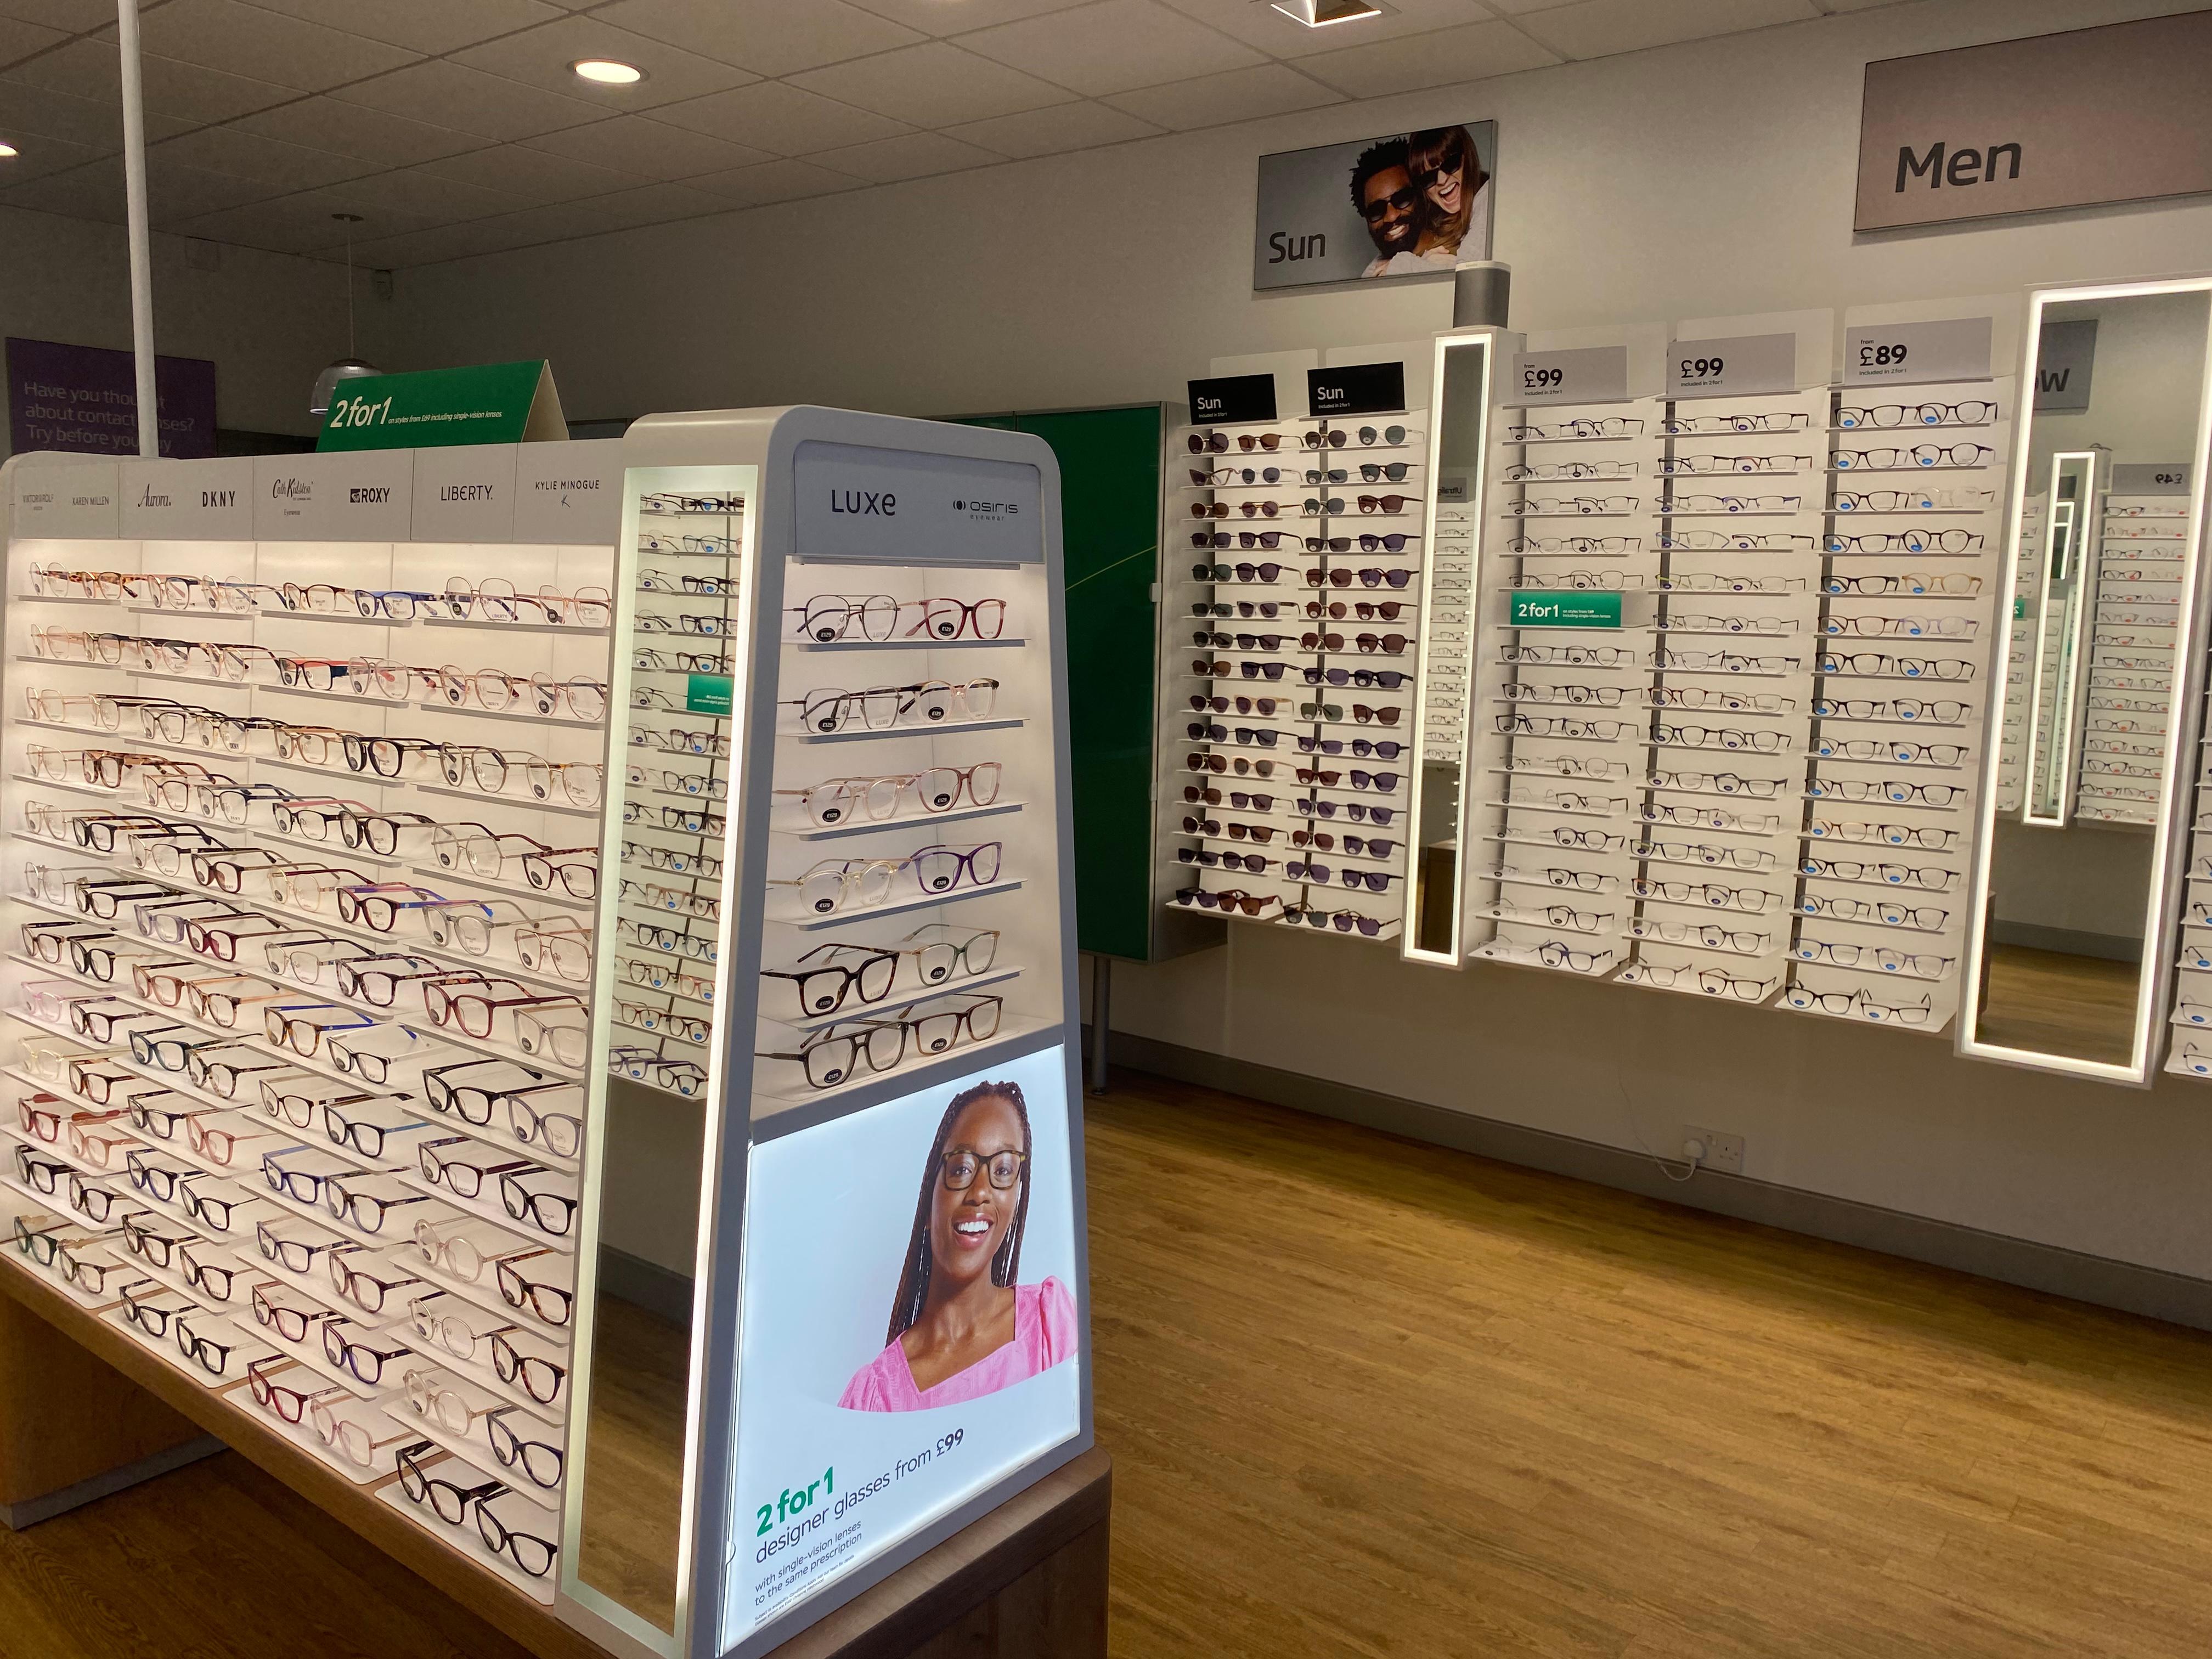 Specsavers Opticians and Audiologists - Swanley Specsavers Opticians and Audiologists - Swanley Kent 01322 616465